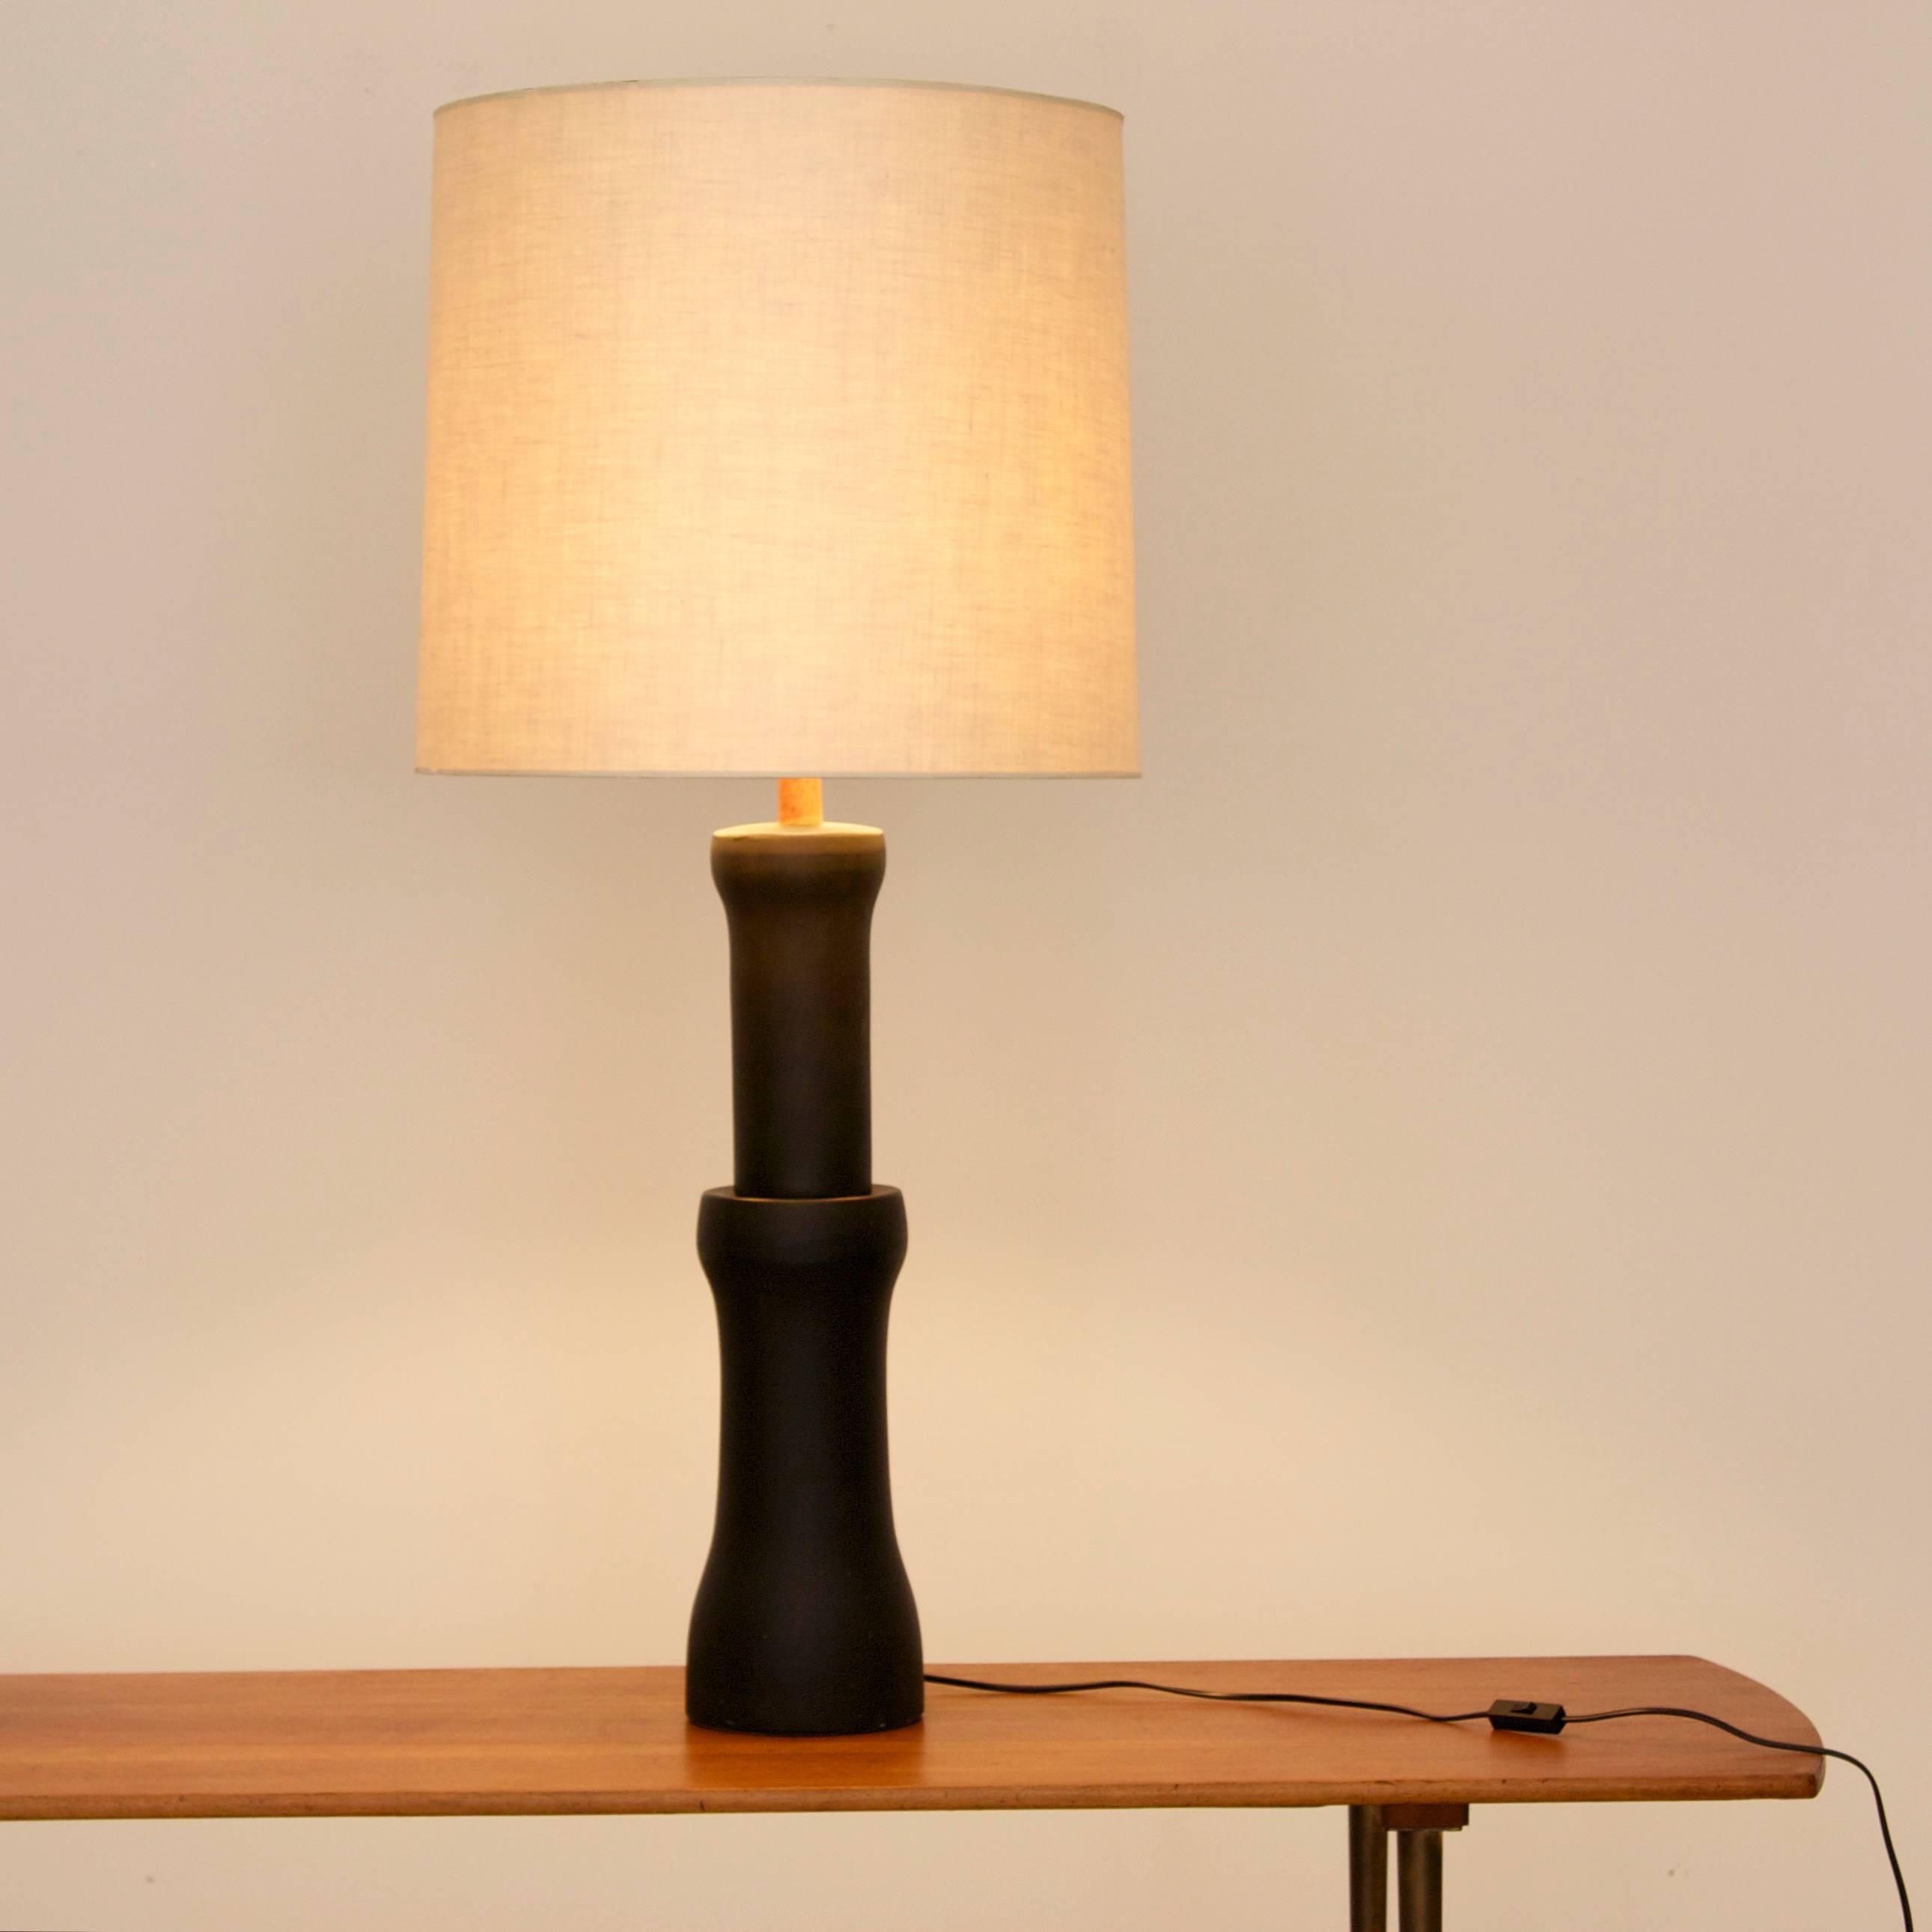 Large table lamp by Martz in excellent condition with original shade in black ceramic with no chips!